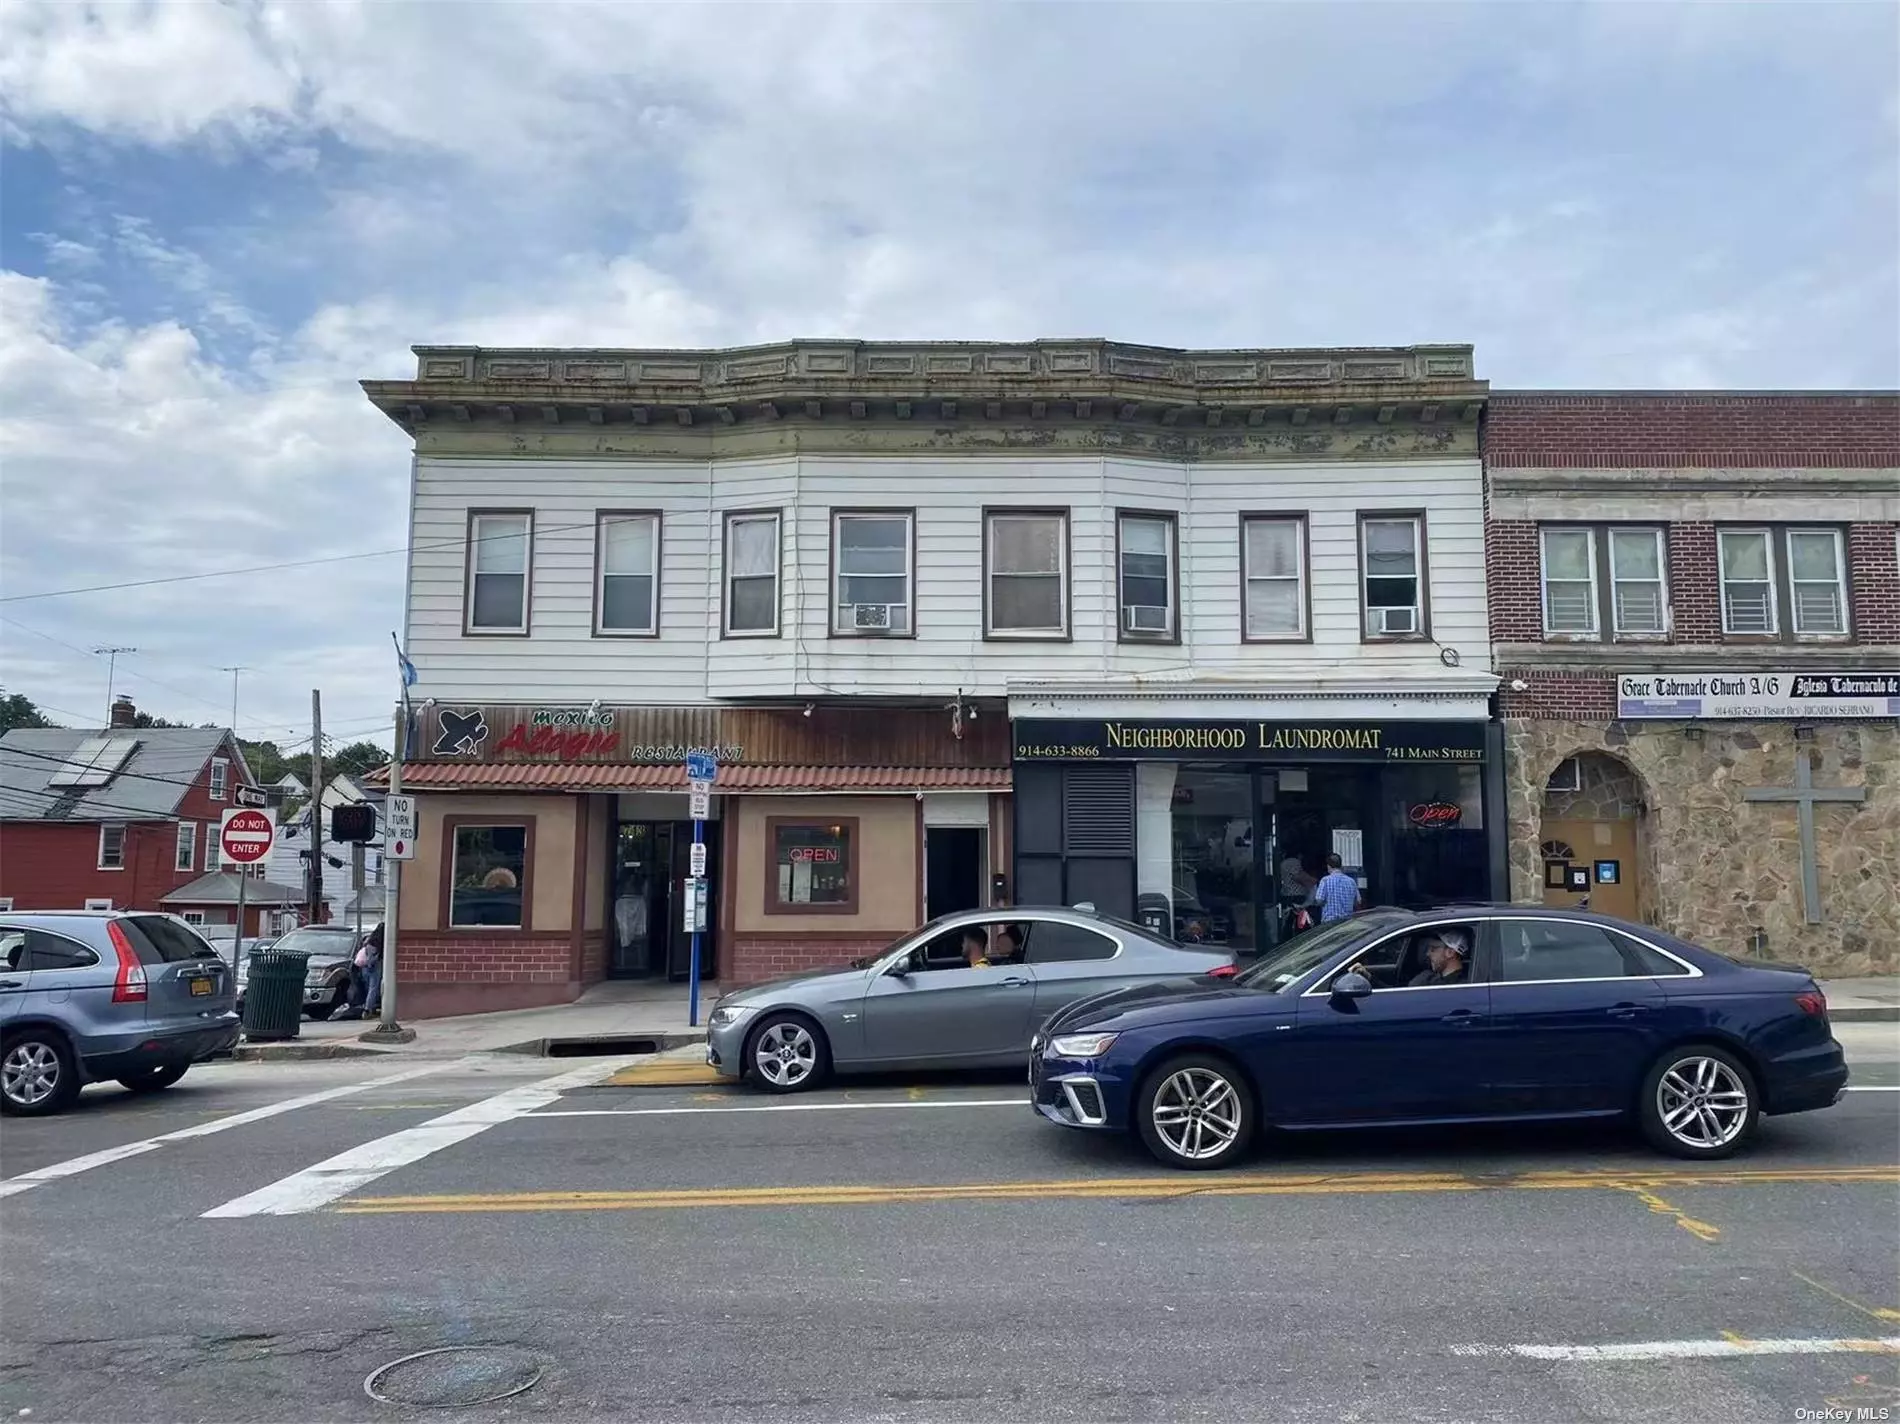 Good income property for investors on a busy street with 6.1% cap rate. Two 3 bedrooms and 1 bath residential units with two storefronts, a restaurant and a laundromat.